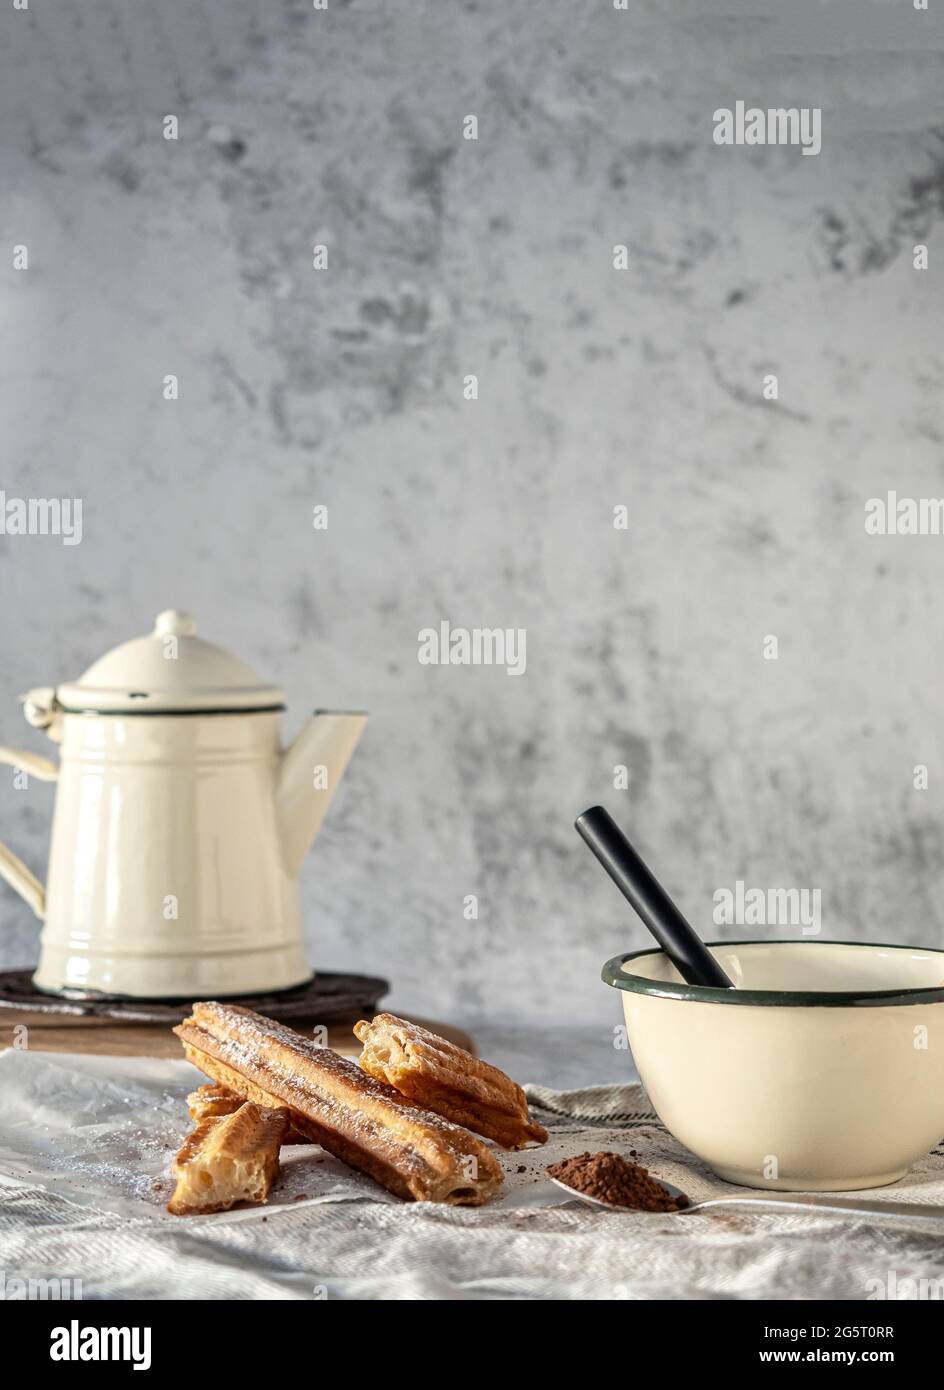 Typical Spanish breakfast or snack. Churros in paper bag with sugar. Cup with chocolate and spoon with cocoa. White background. Stock Photo